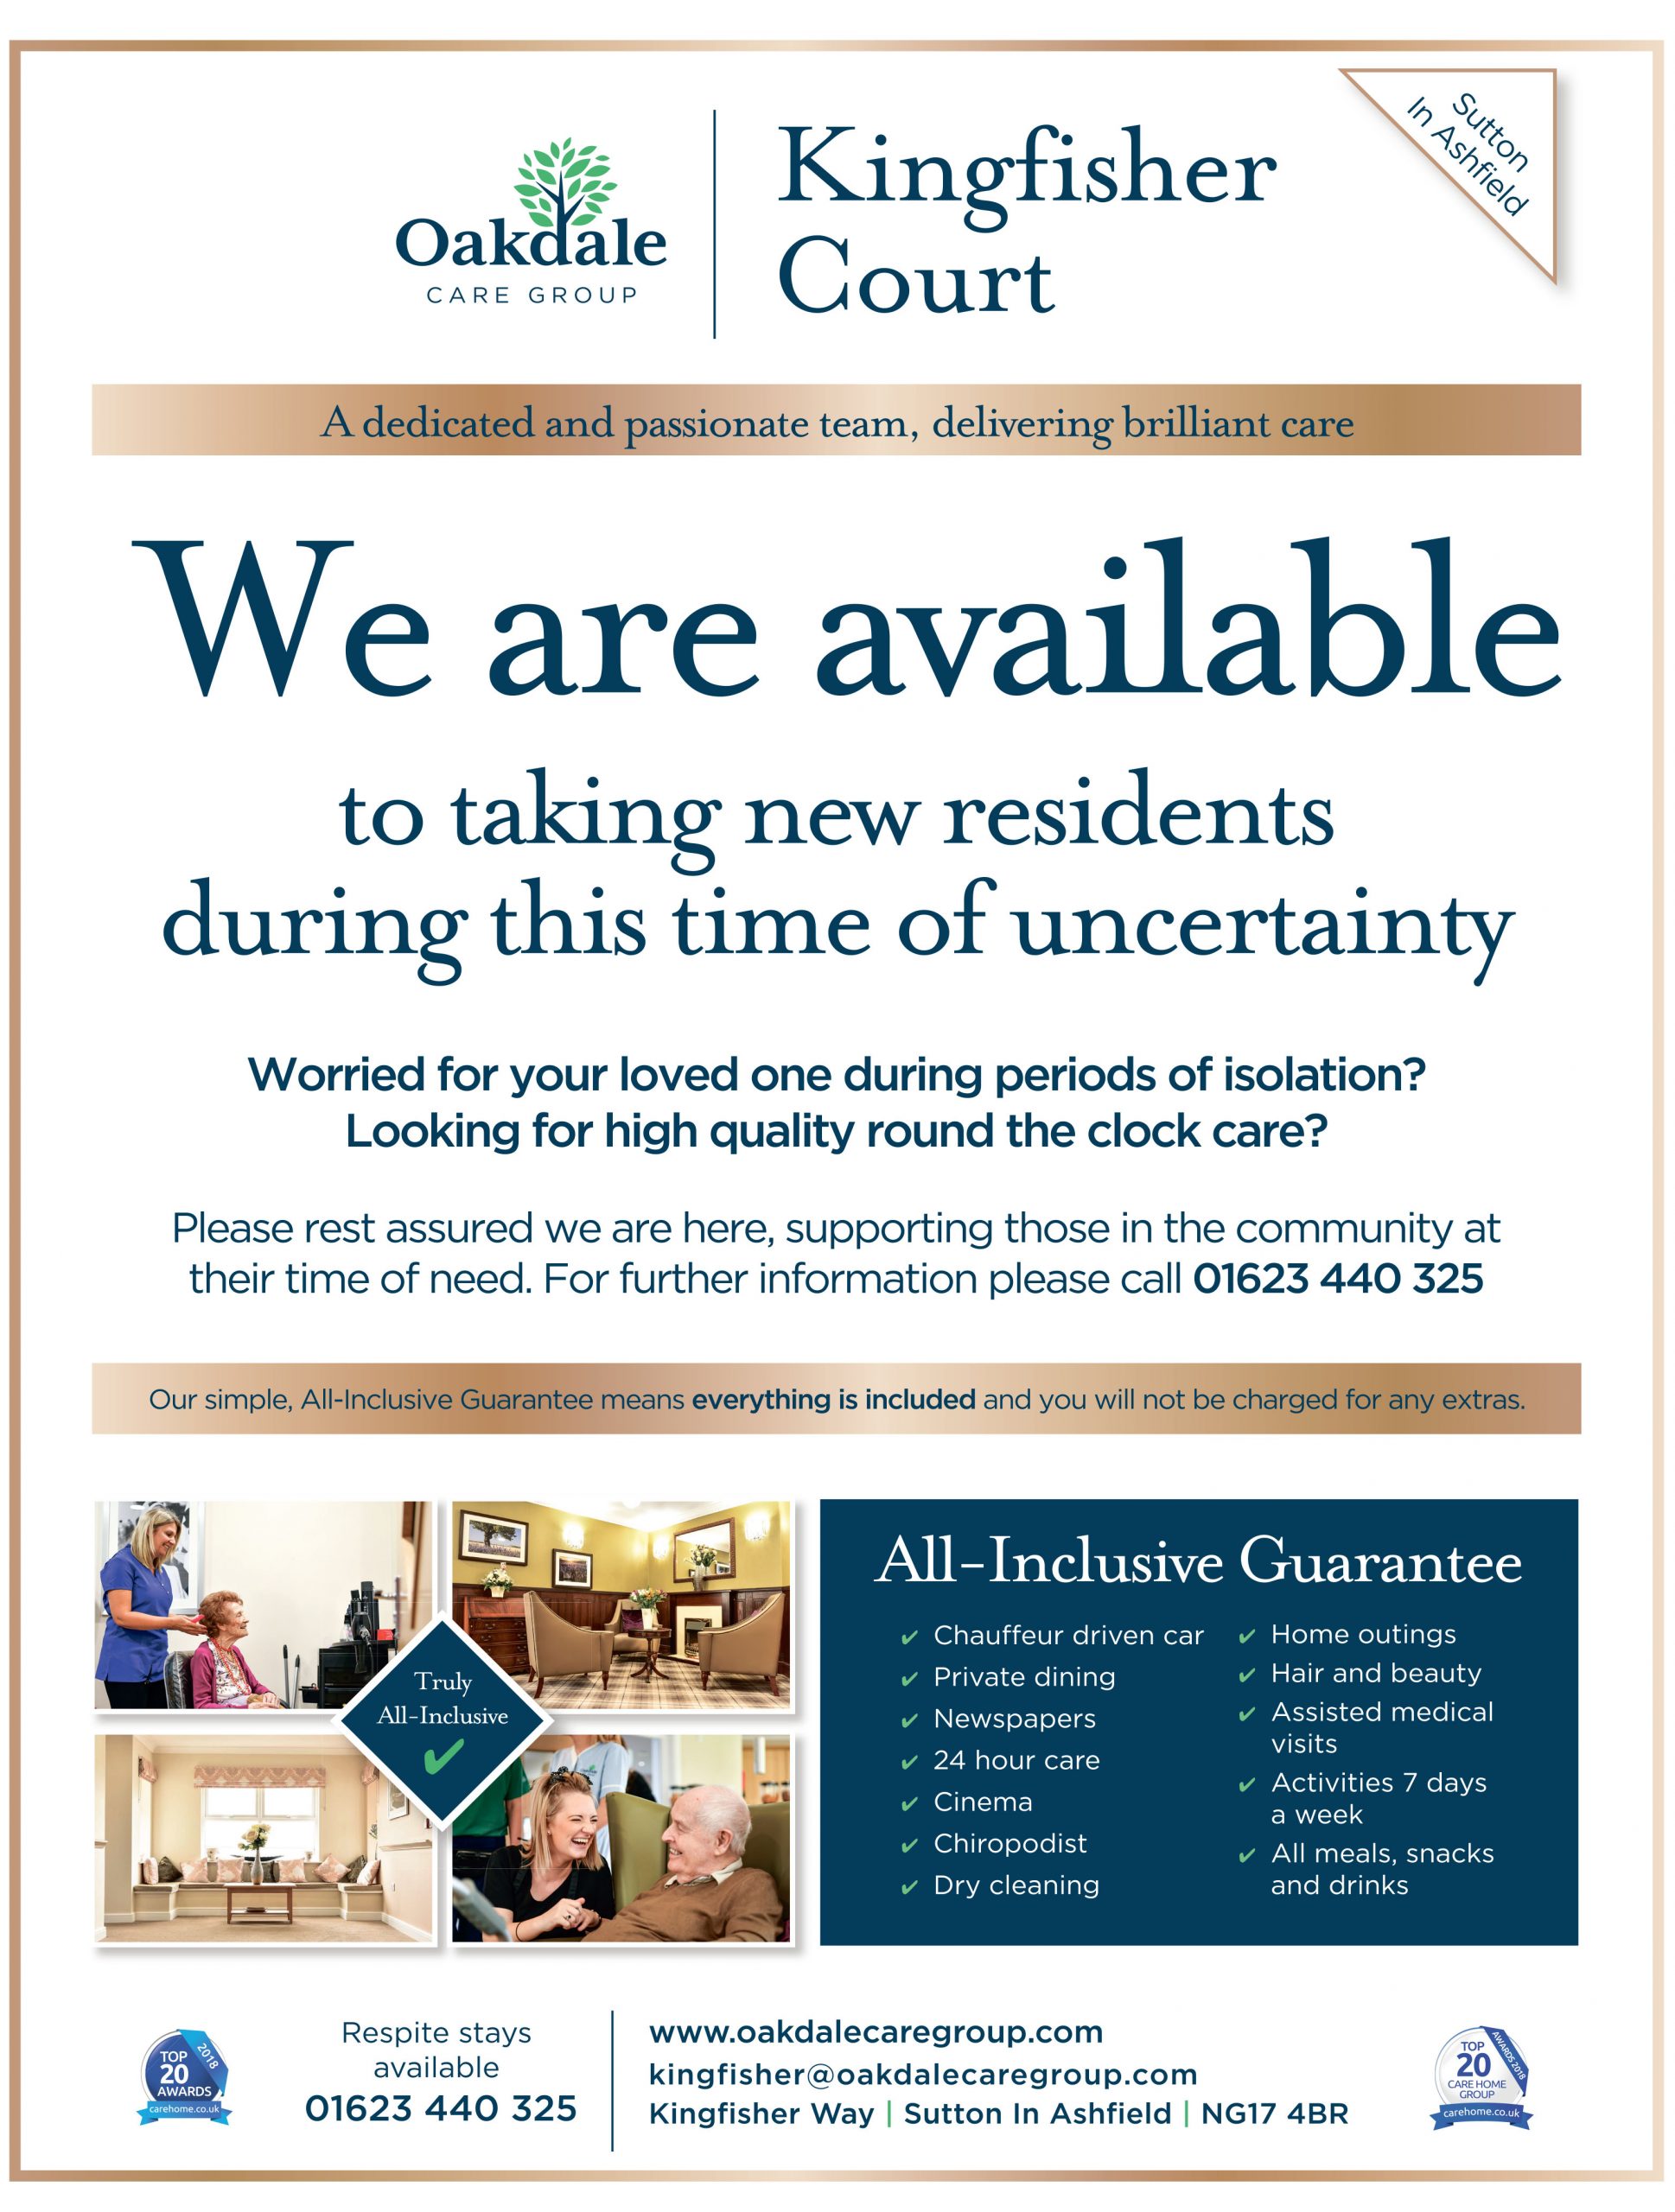 Kingfisher Court Care Home